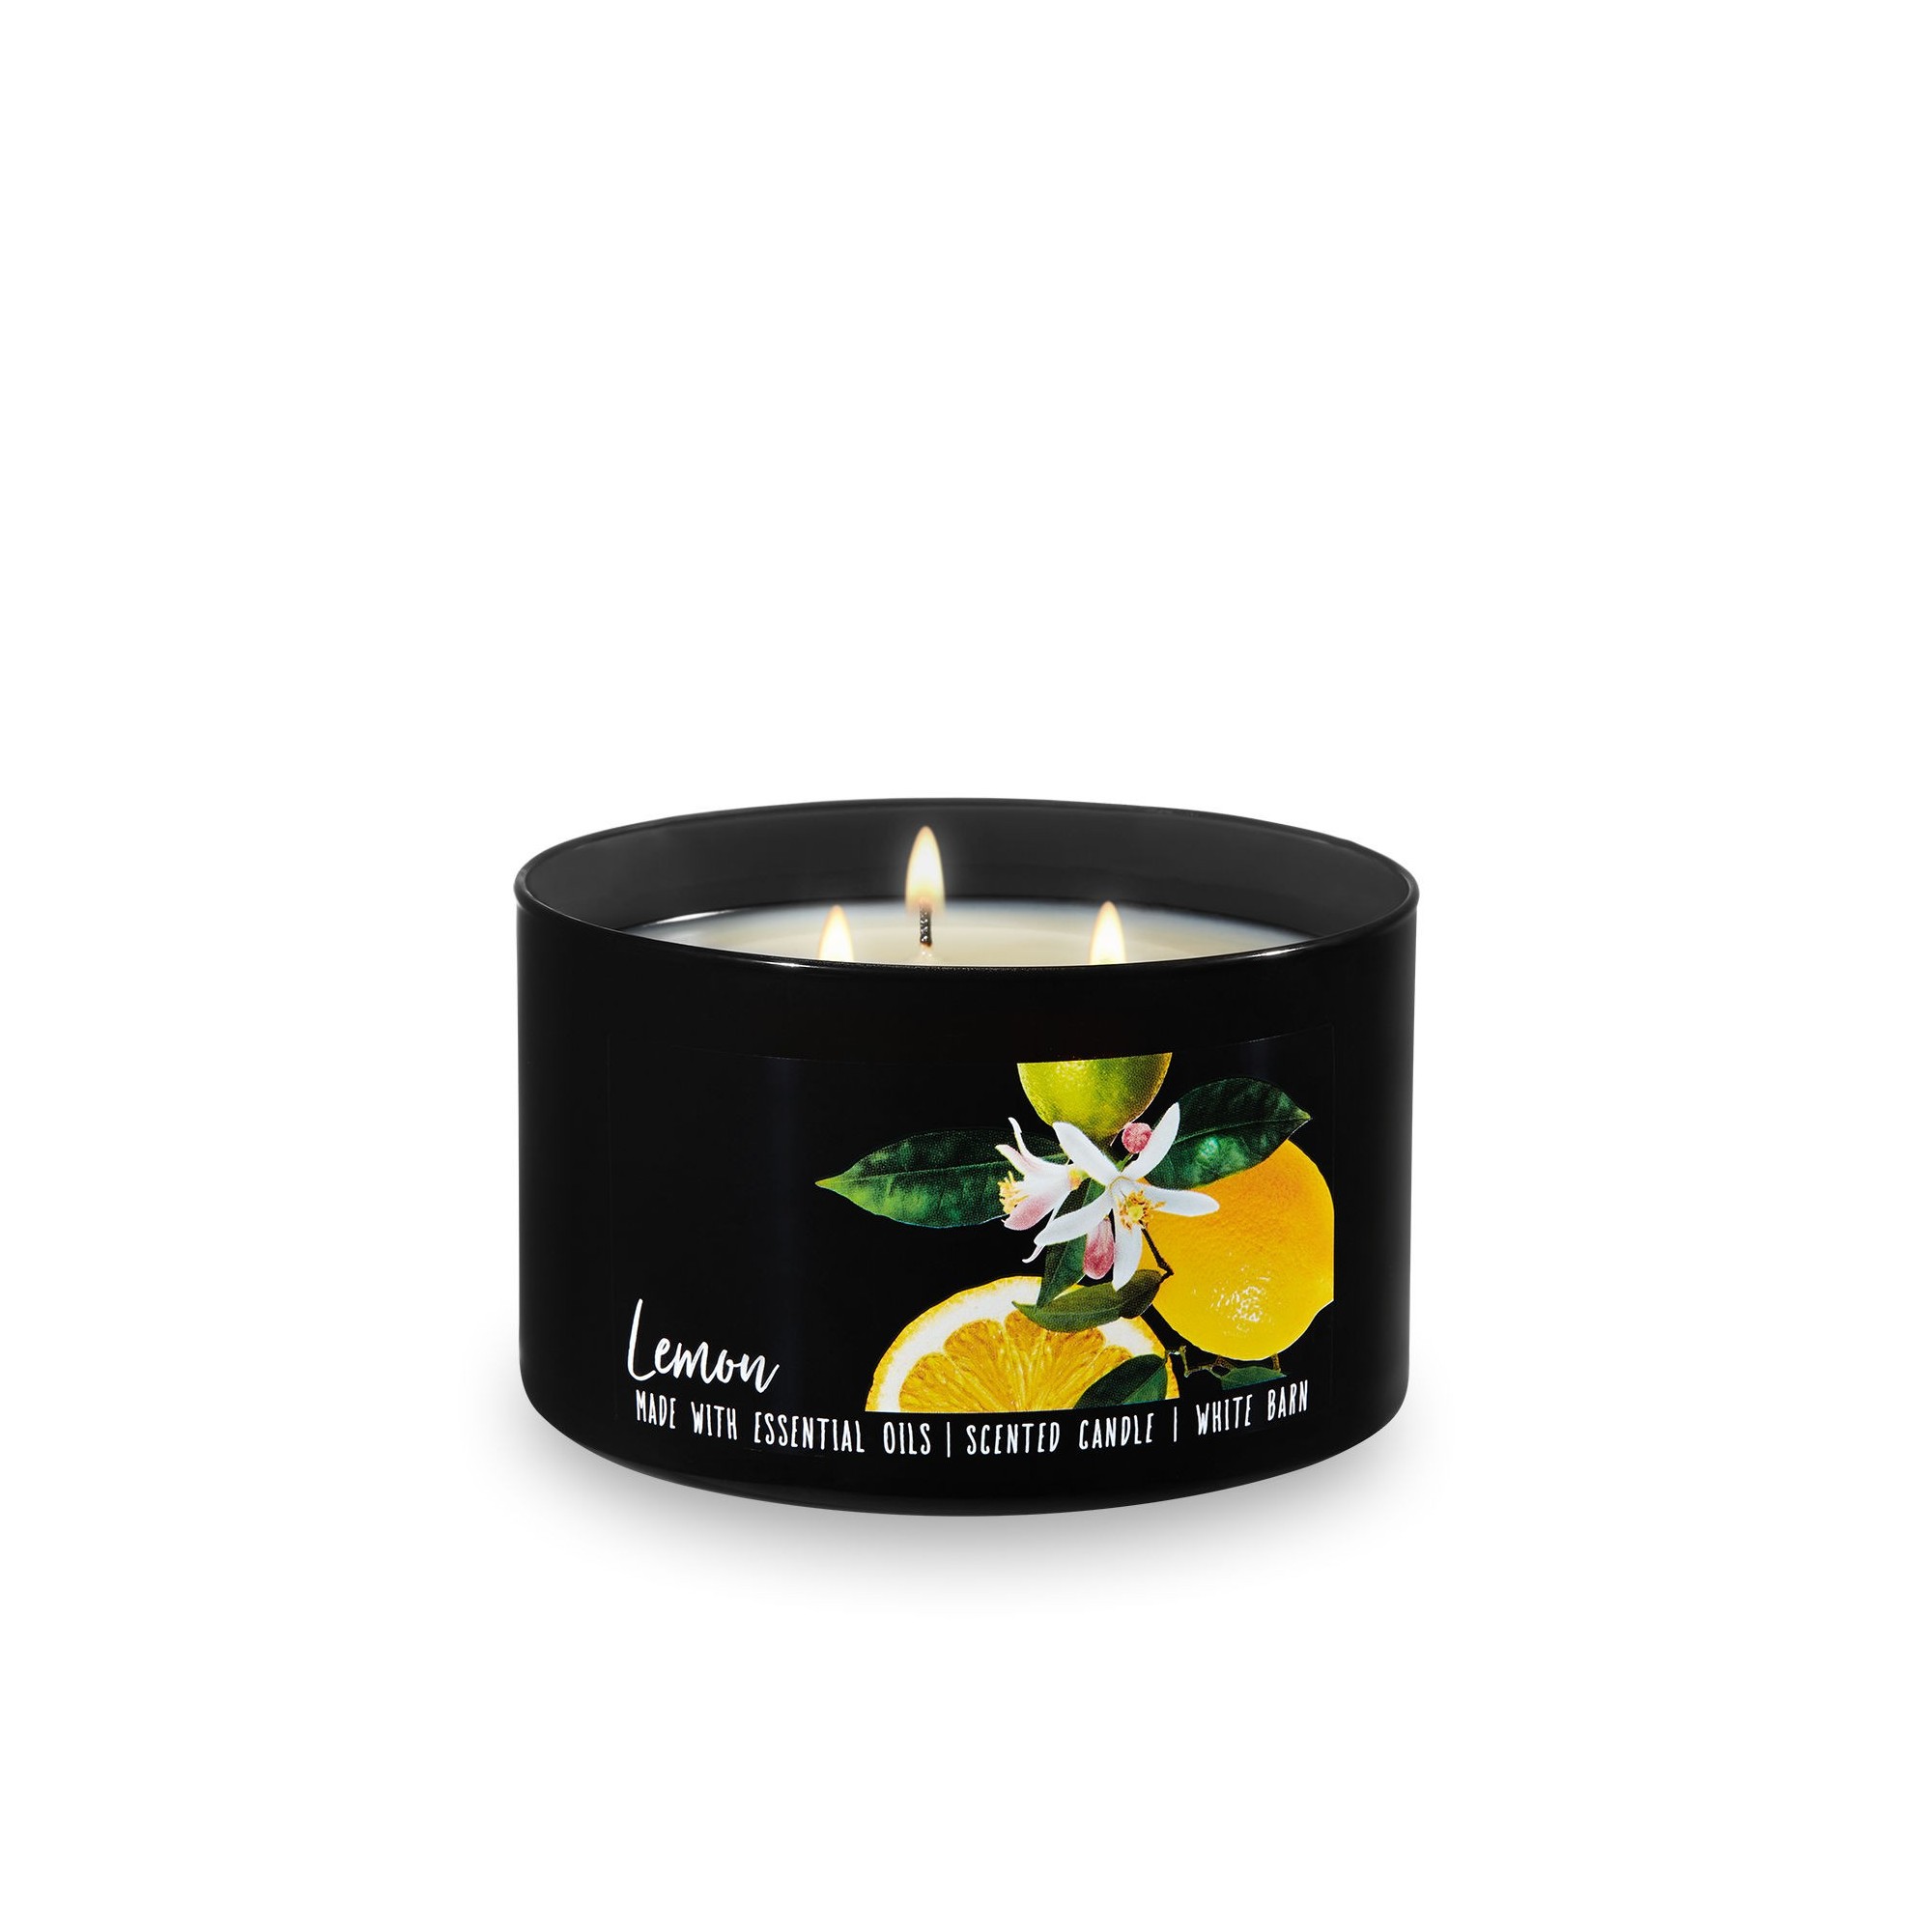 Bath & Body Works White Barn Lemon 3 Wick Scented Candle